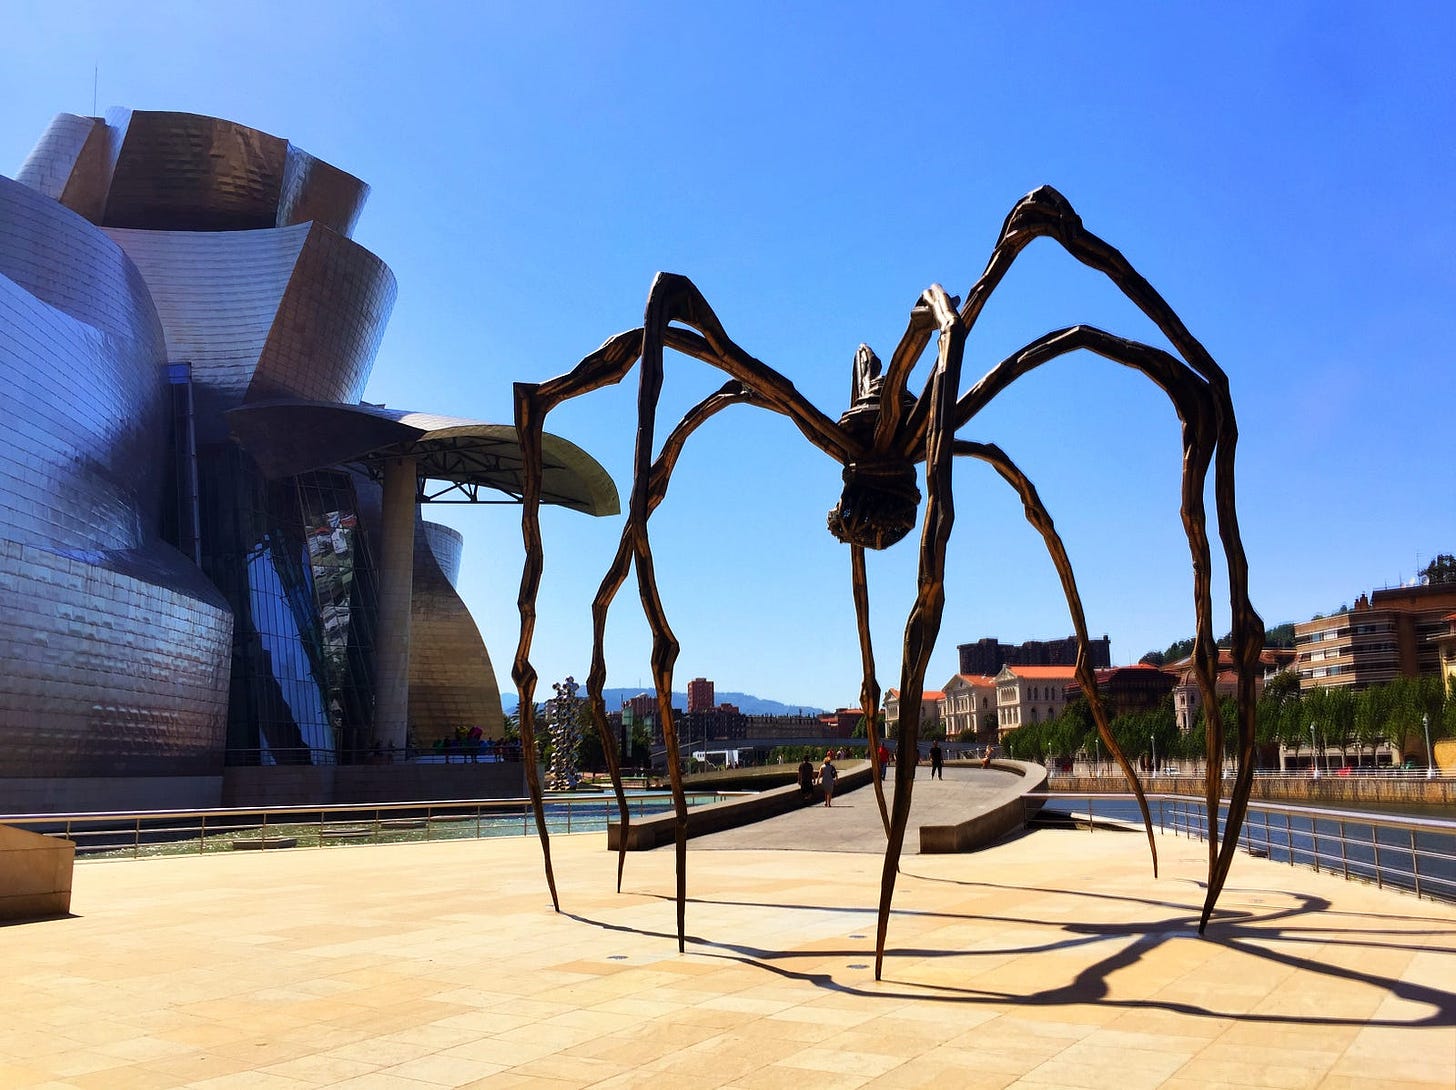 It's a huge 8 or 10 meters high spider. The museum is in the background